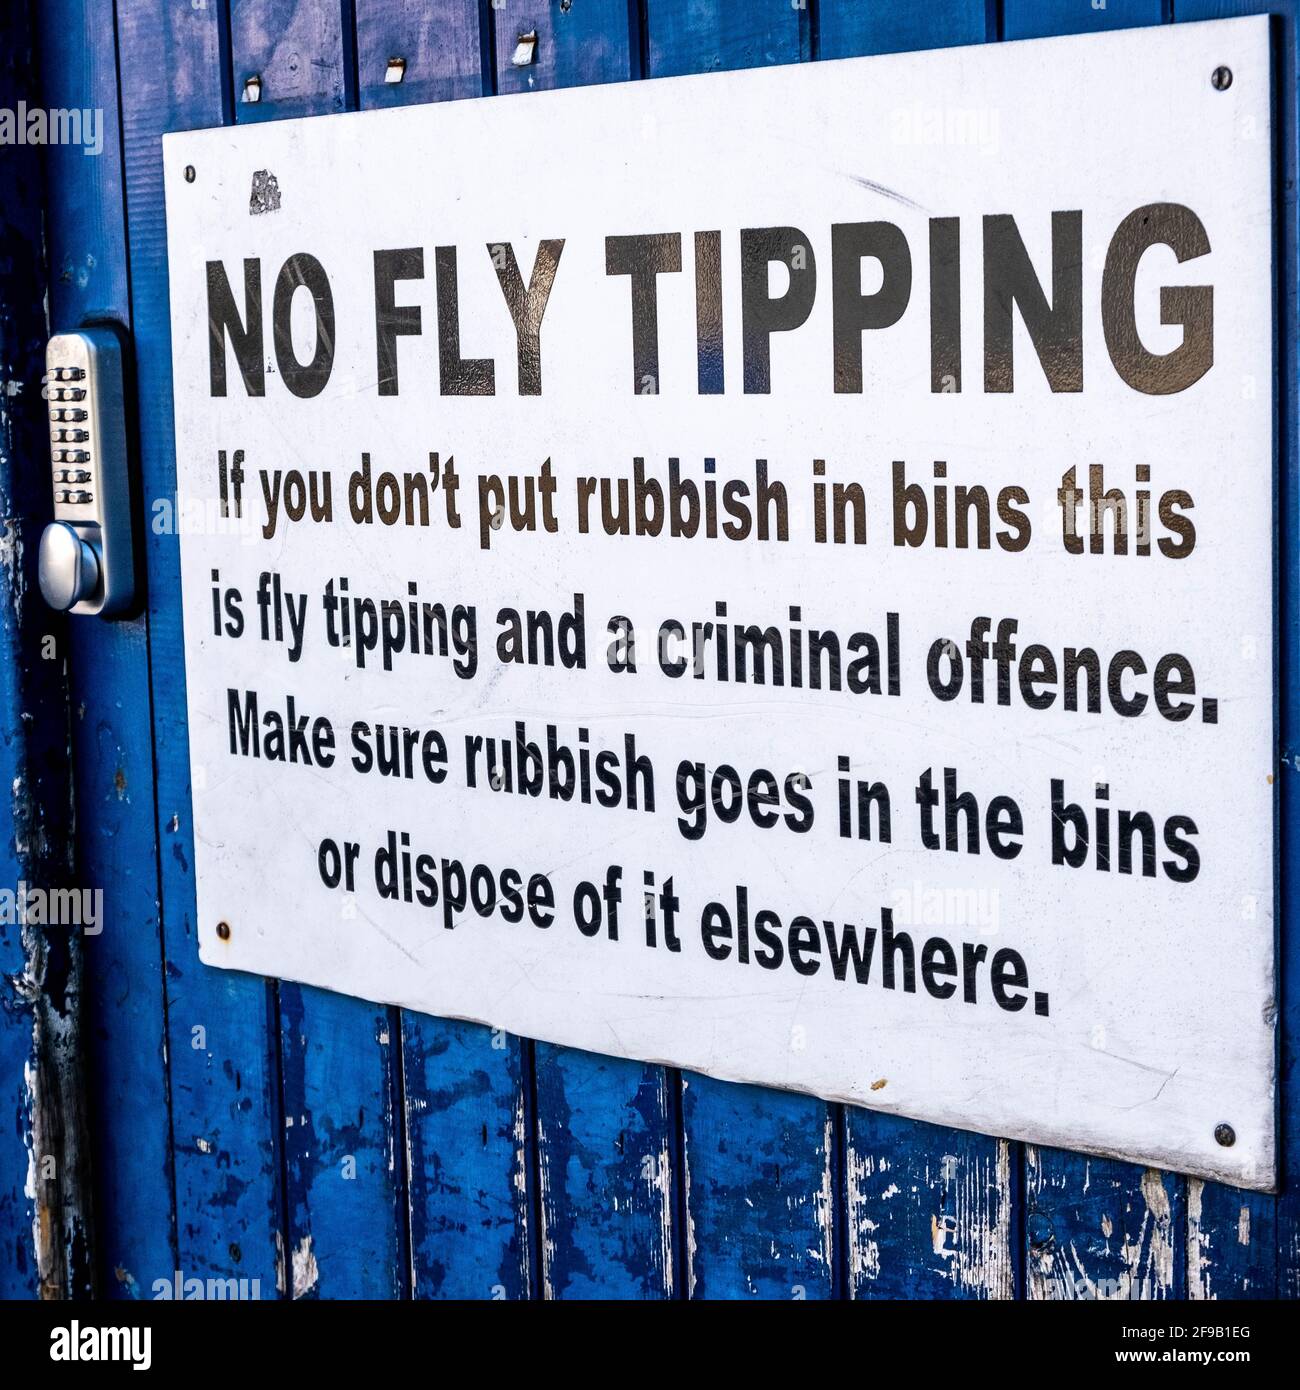 Epsom London UK, April 17 2021, Public Warning Sign Or Notice Against Fly Tipping With No People Stock Photo